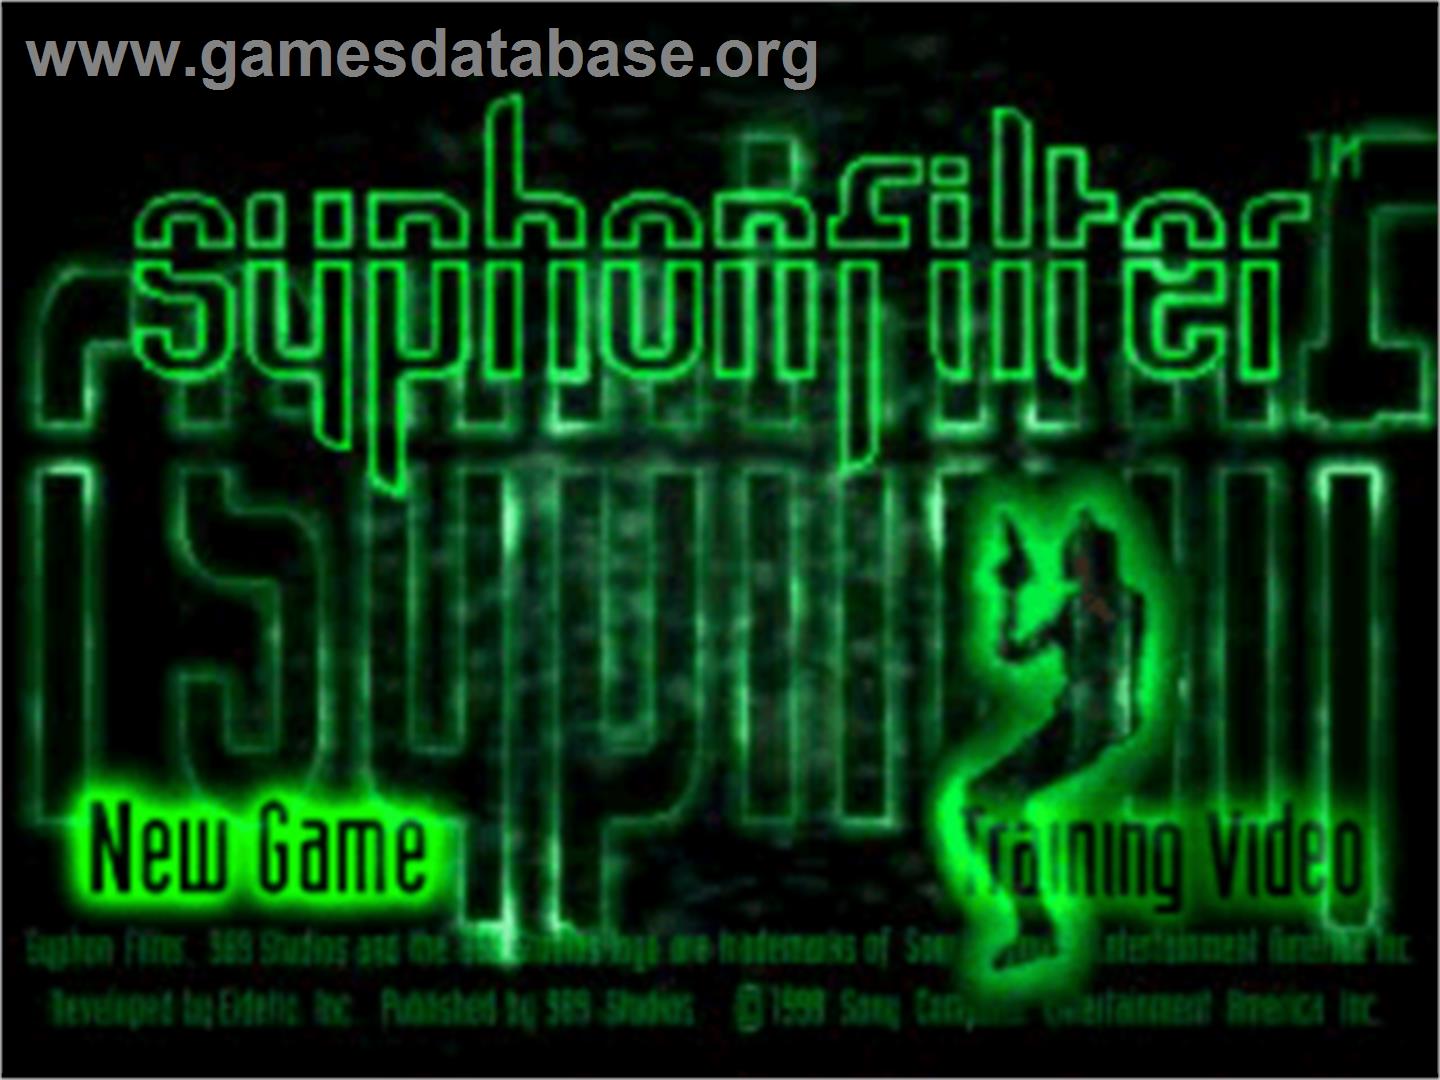 Syphon Filter - Sony Playstation - Artwork - Title Screen